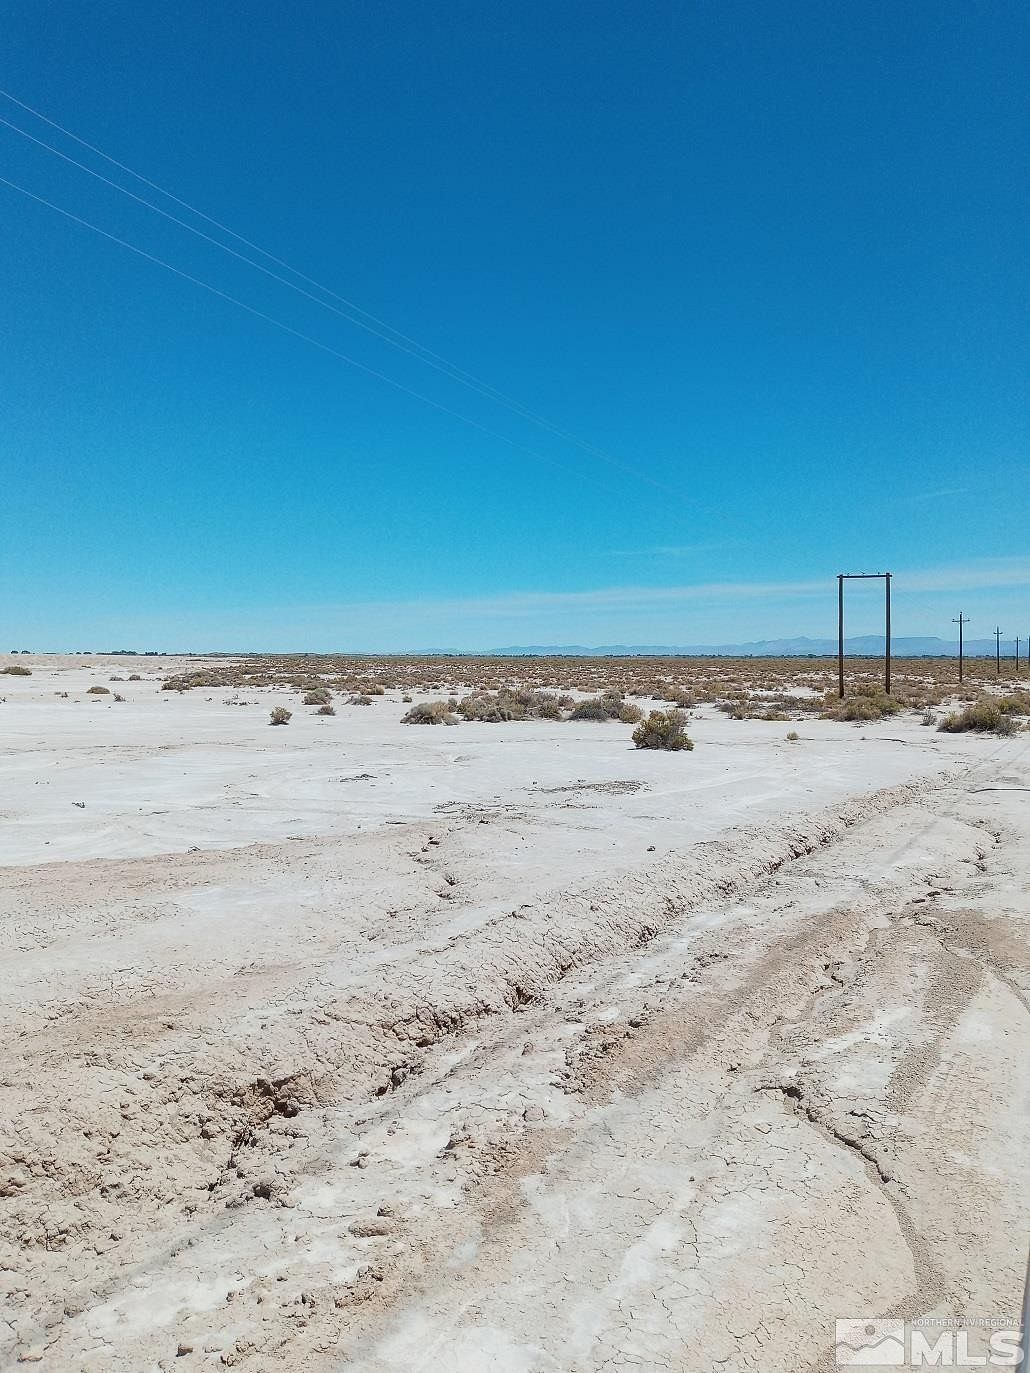 40 Acres of Land for Sale in Fallon, Nevada